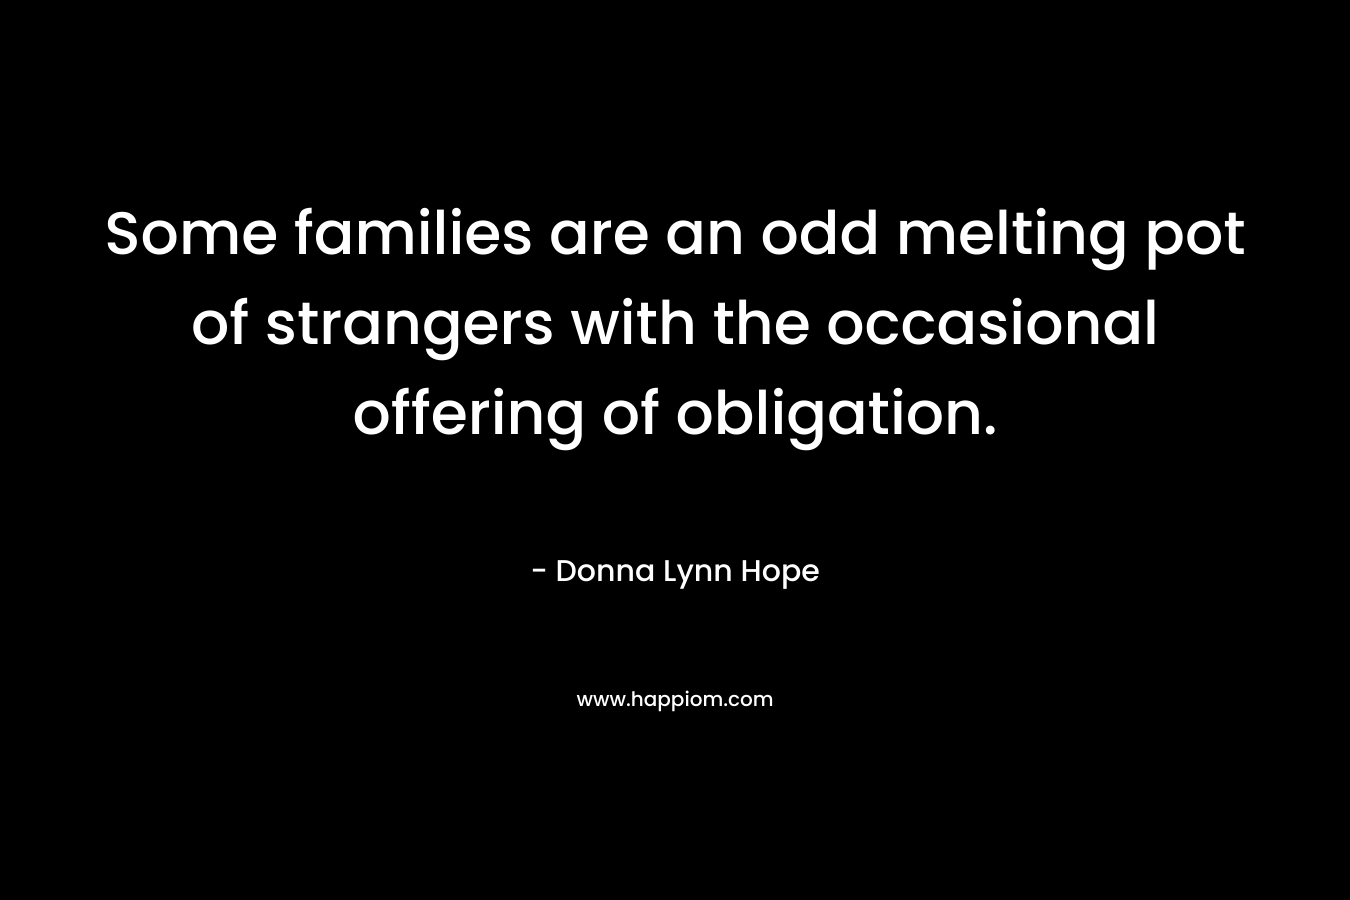 Some families are an odd melting pot of strangers with the occasional offering of obligation. – Donna Lynn Hope